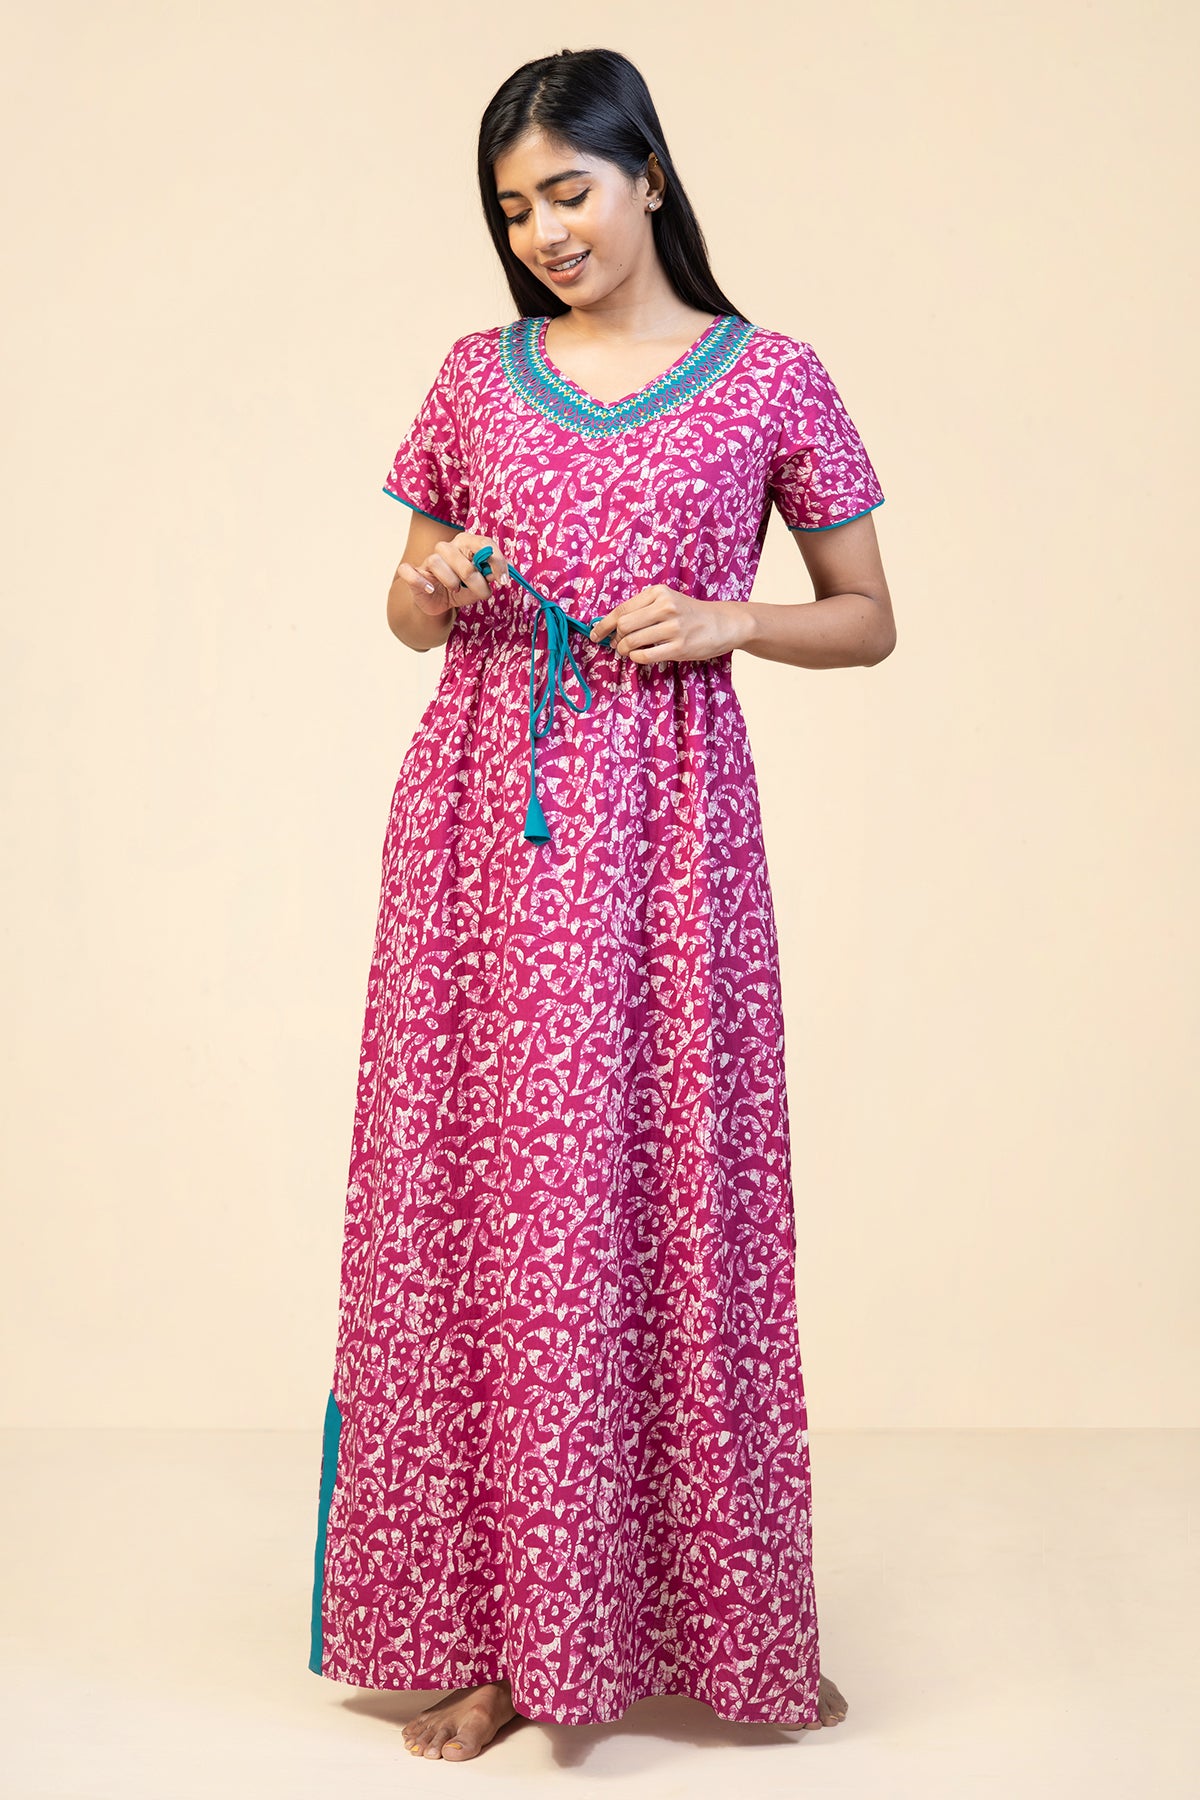 All Over Batik Printed with Embroidered Yoke - Pink